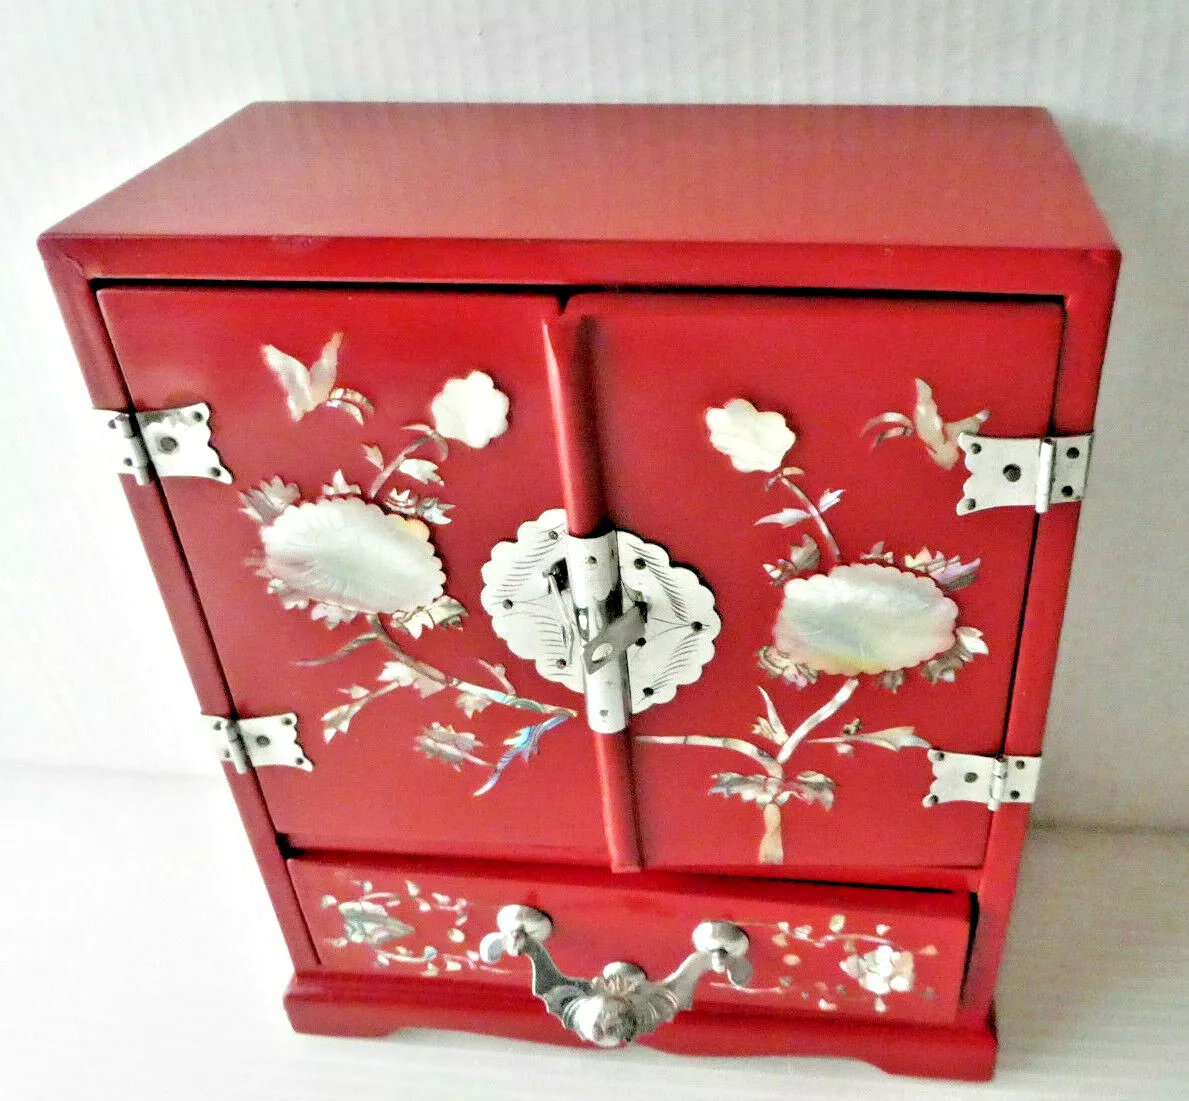 Mother of Pearl Inlay Art Butterfly Flower Lacquer Wood Lock Key Jewelry Trinket Treasure Box Case Chest並行輸入